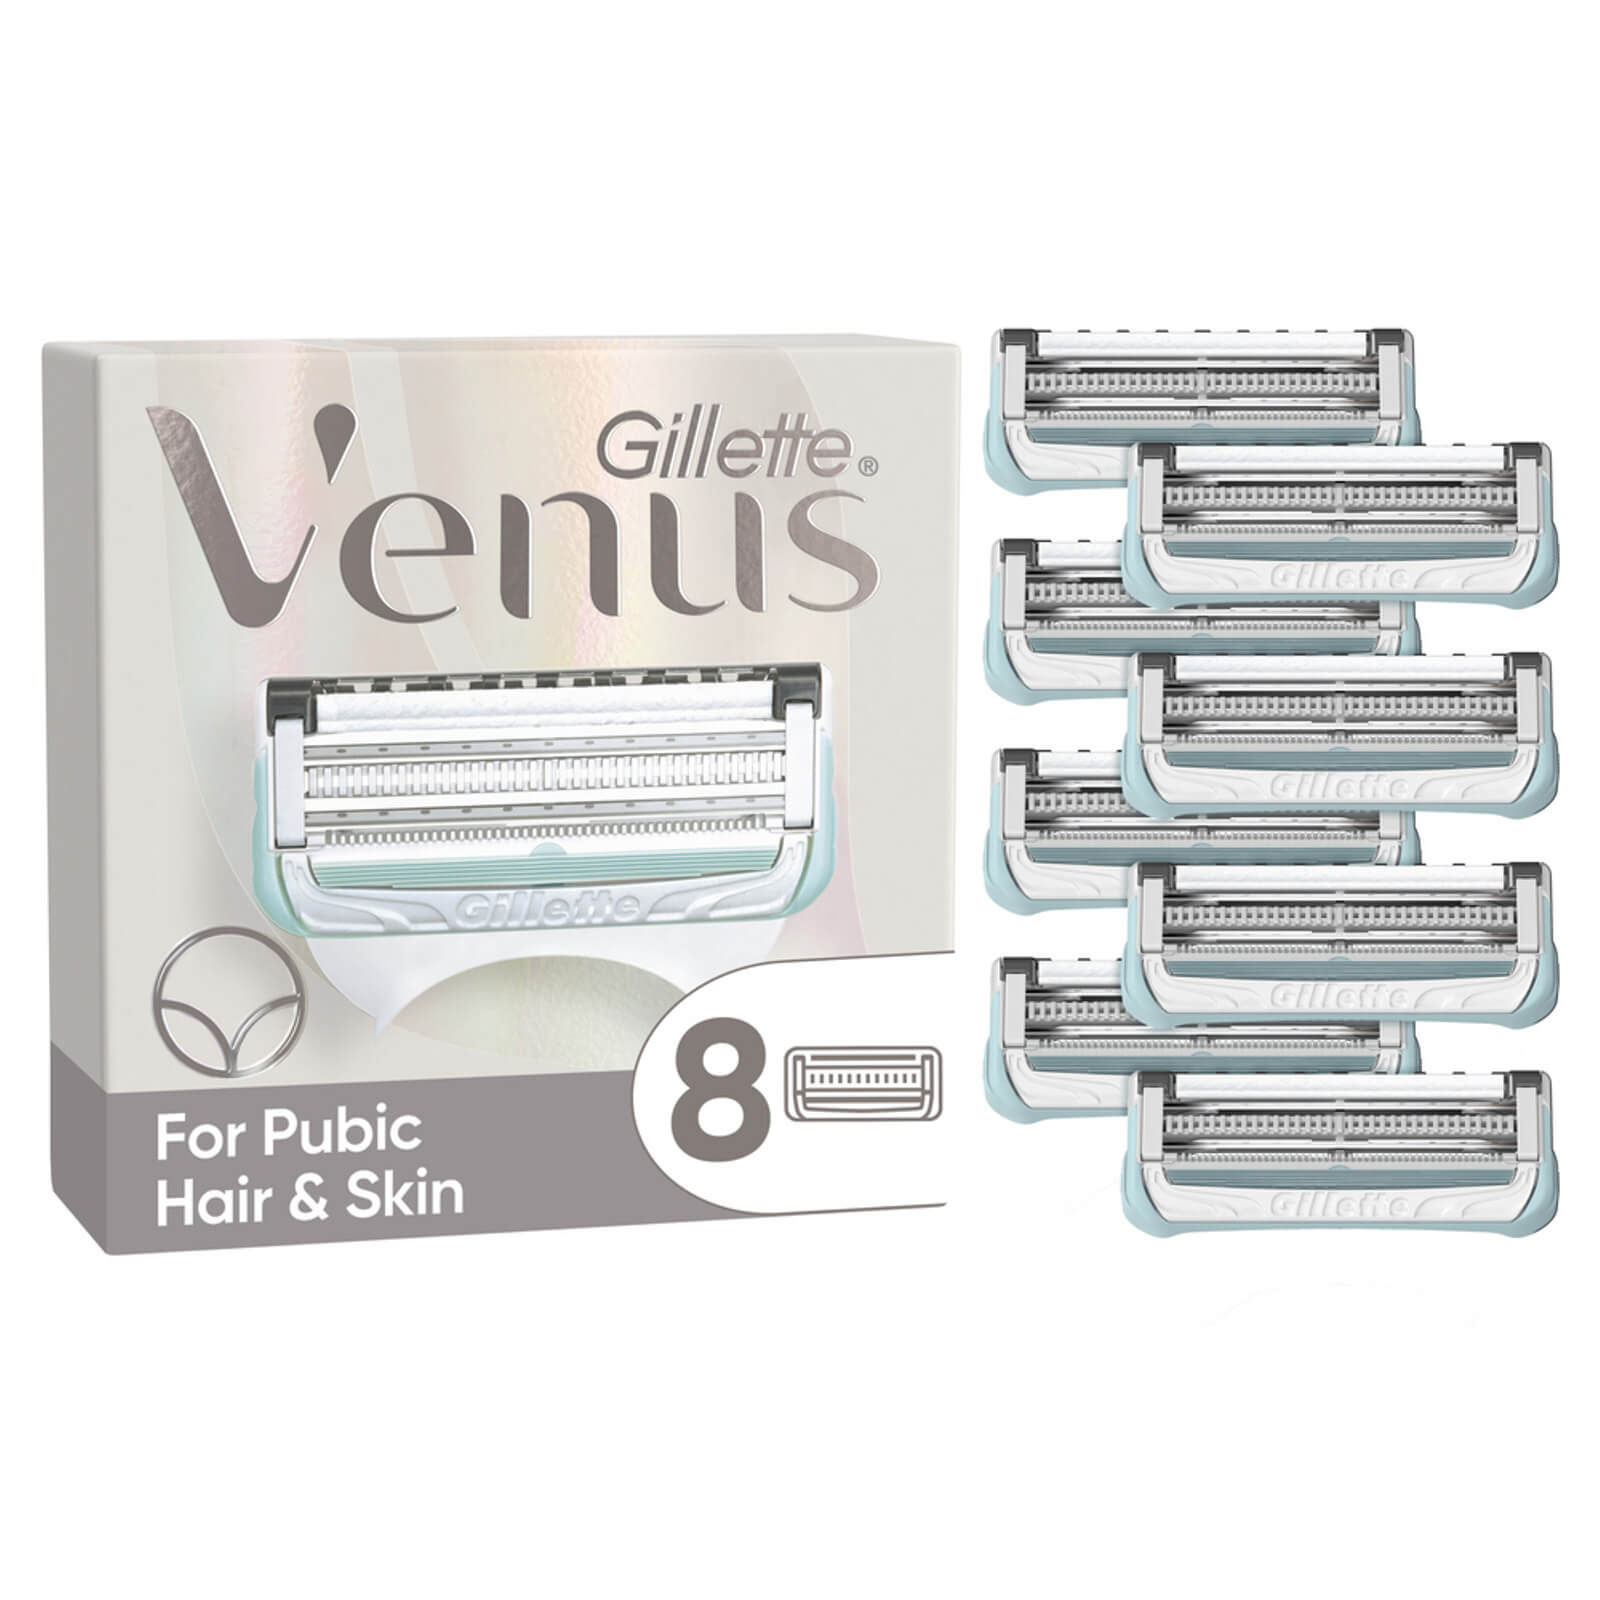 Venus Satin Care Razor Blades for Pubic Hair and Skin - 8 Pack